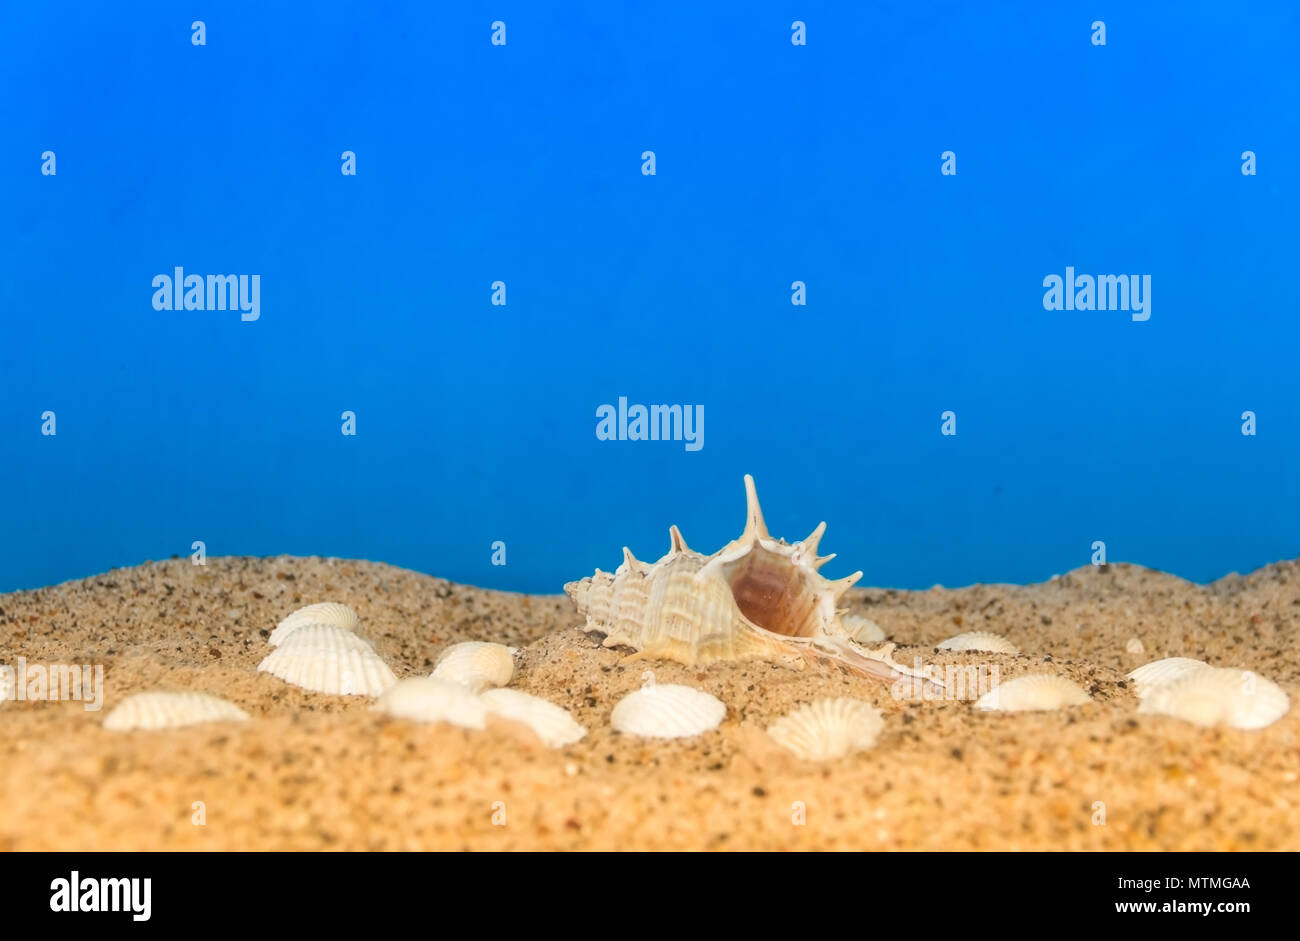 minimalist background representing the summer with snails clams goggles and sand on celestial Stock Photo